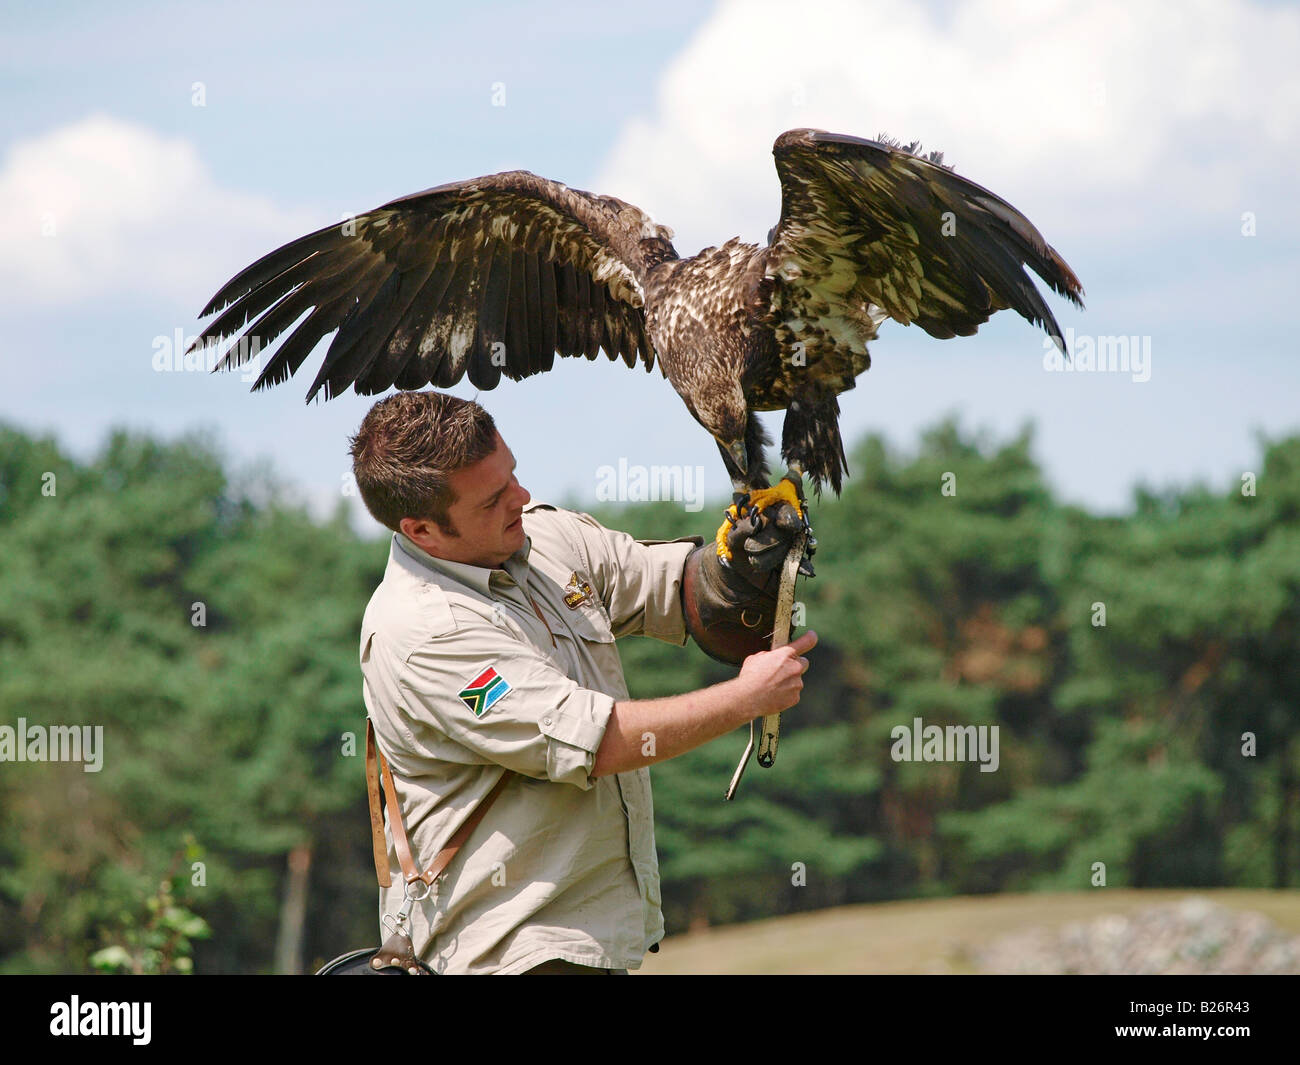 Bird trainer with young american eagle Beekse bergen zoo Hilvarenbeek the Netherlands Stock Photo